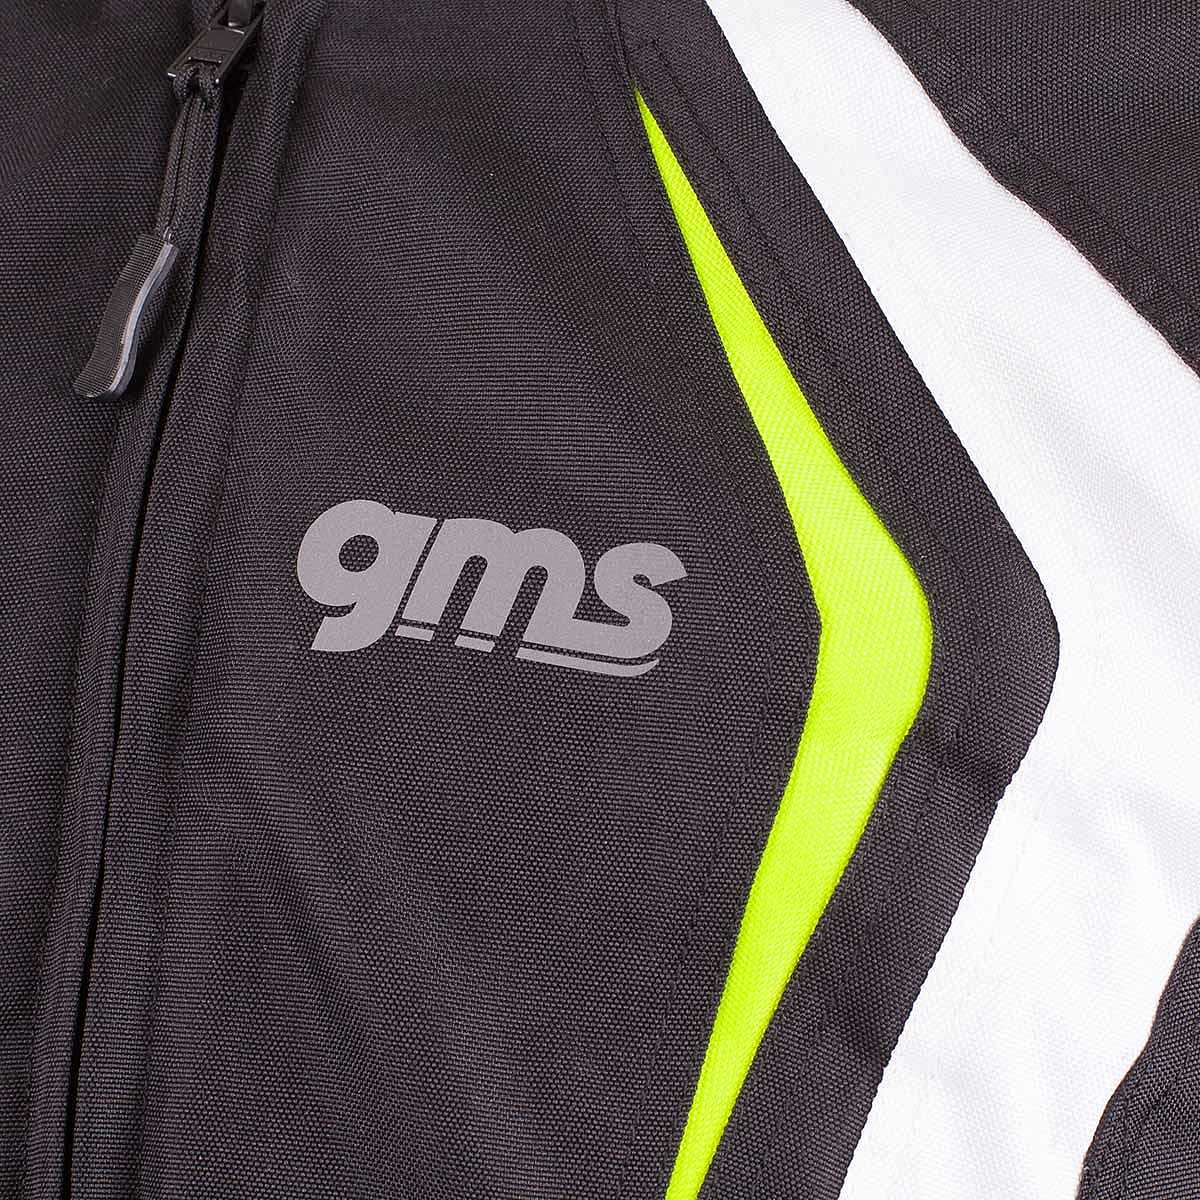 GMS EVEREST Touring Motorcycle Pants Beige Black Yellow For Sale Online 